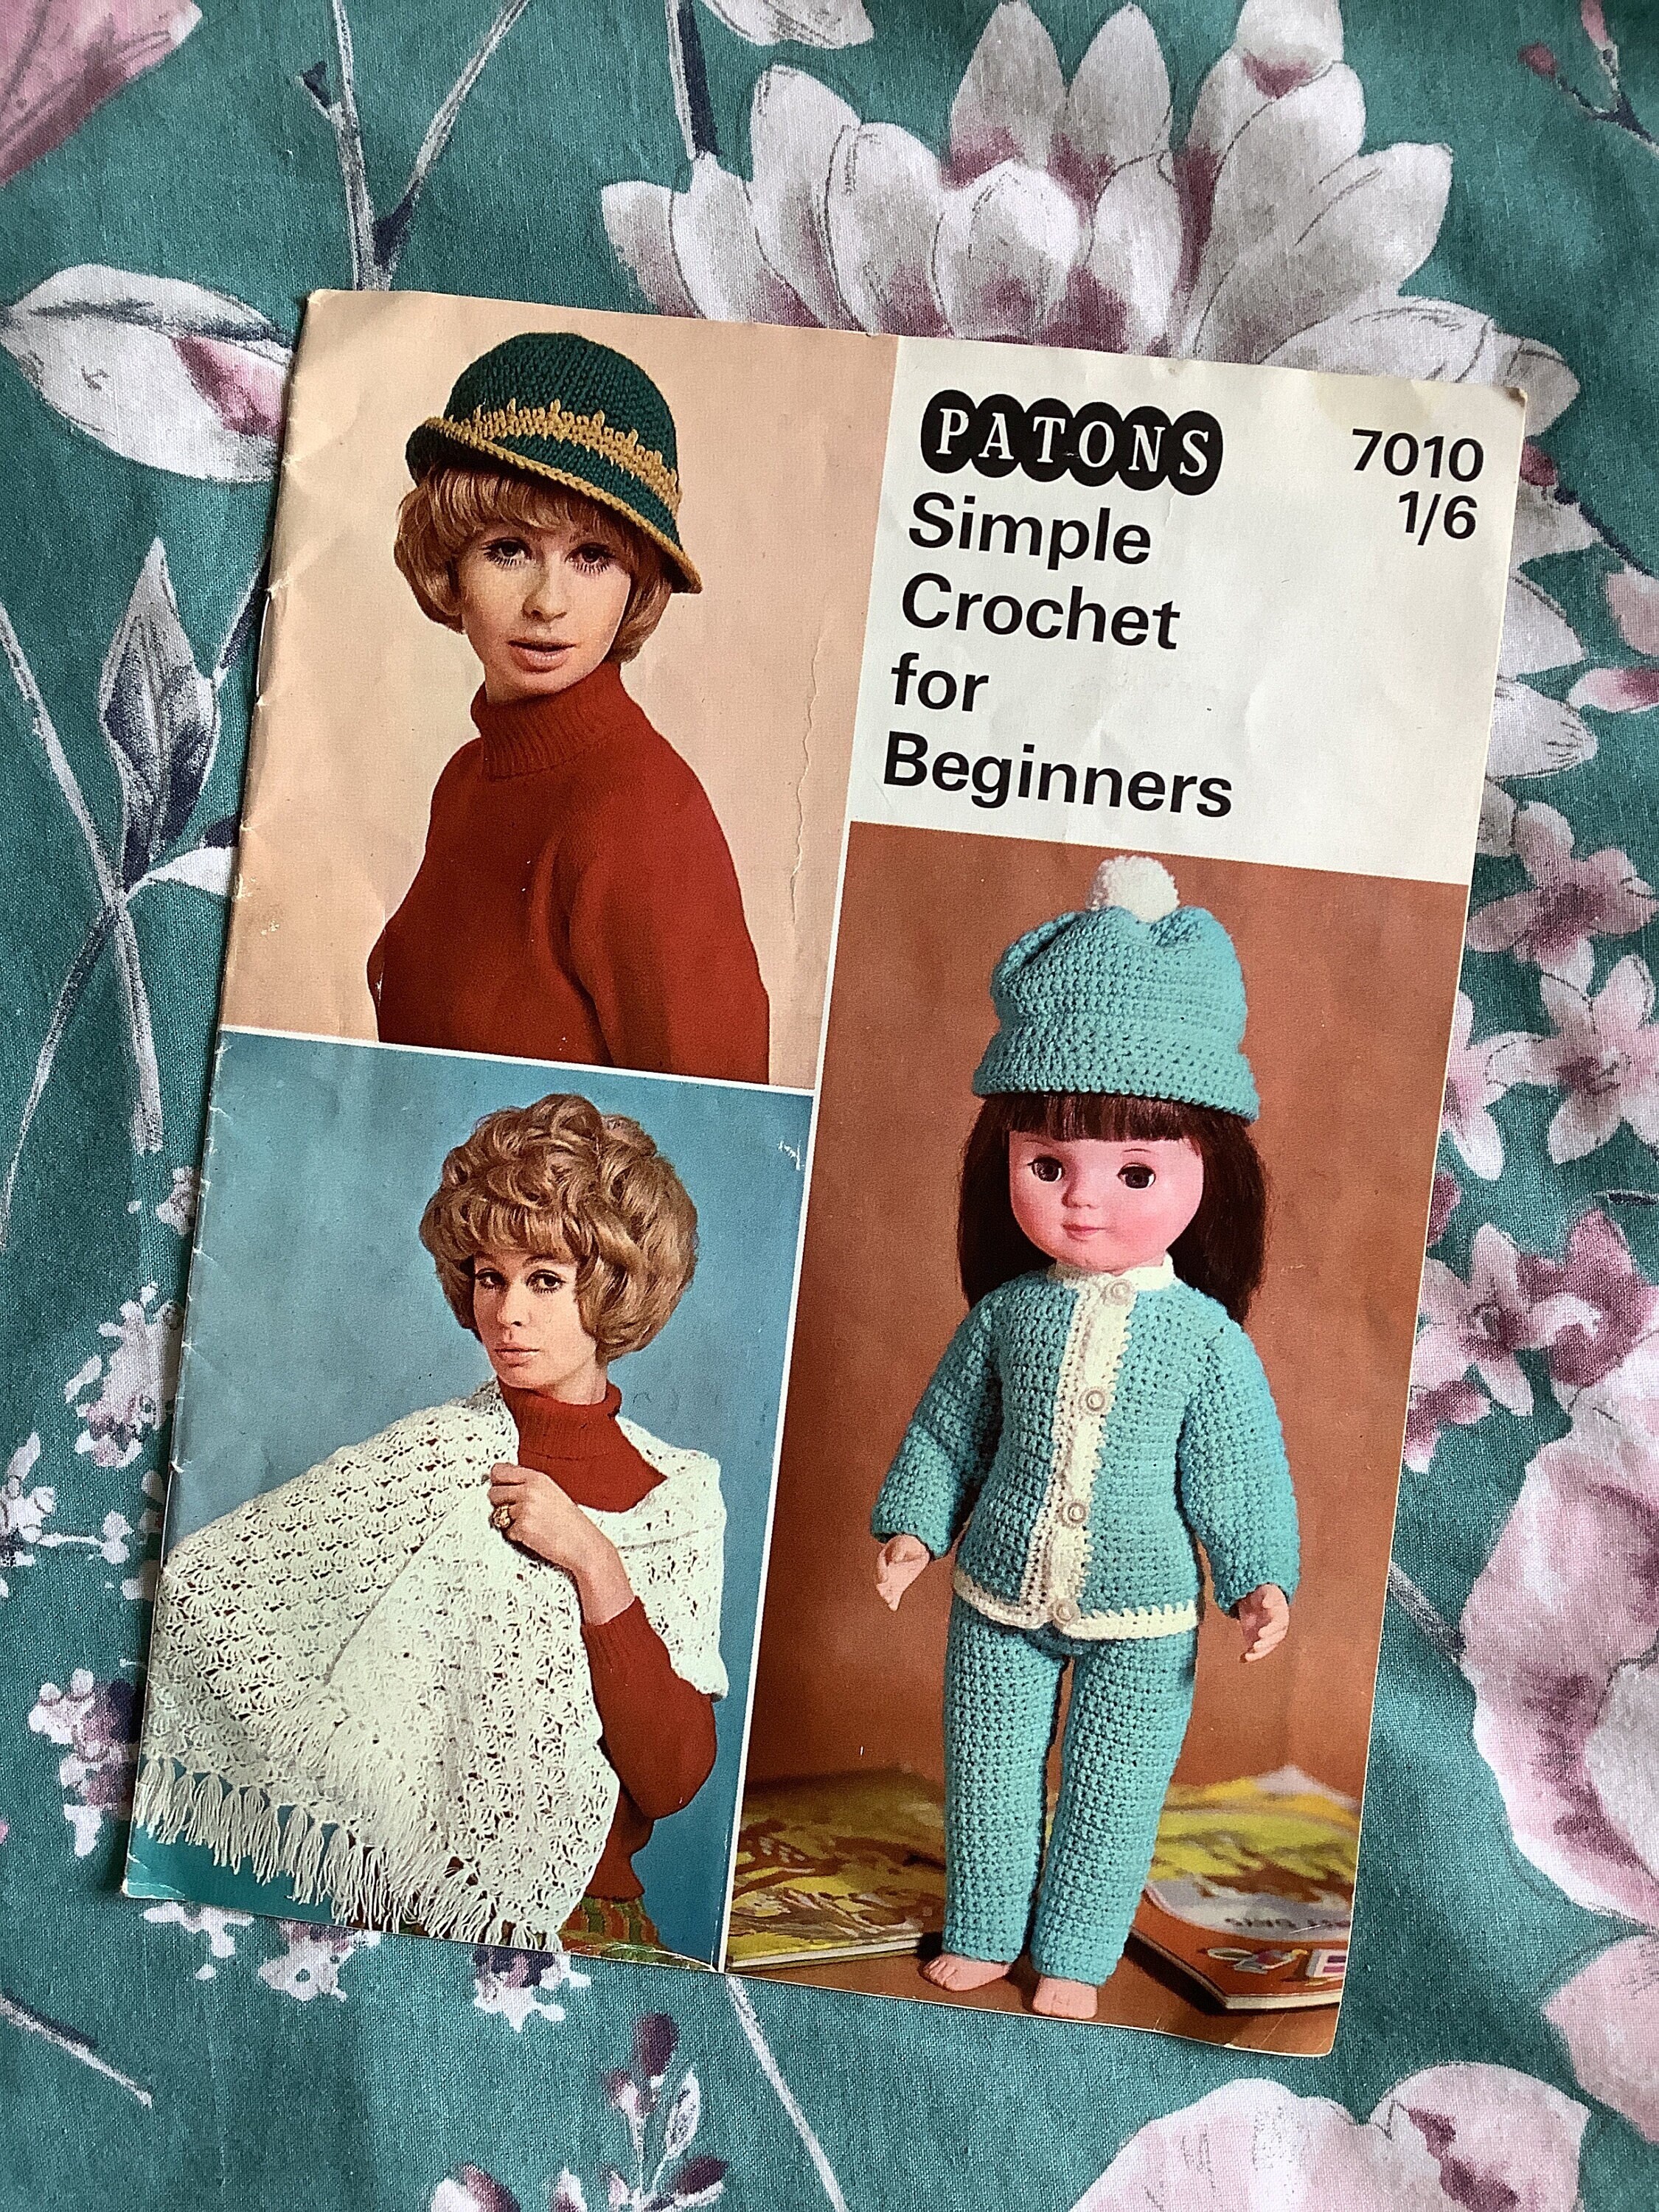 Learn to Crochet Book by Nikki Trench, How to Crochet, Books for Crochet,  Learn How to Crochet, Learn a New Skill, Project Book 